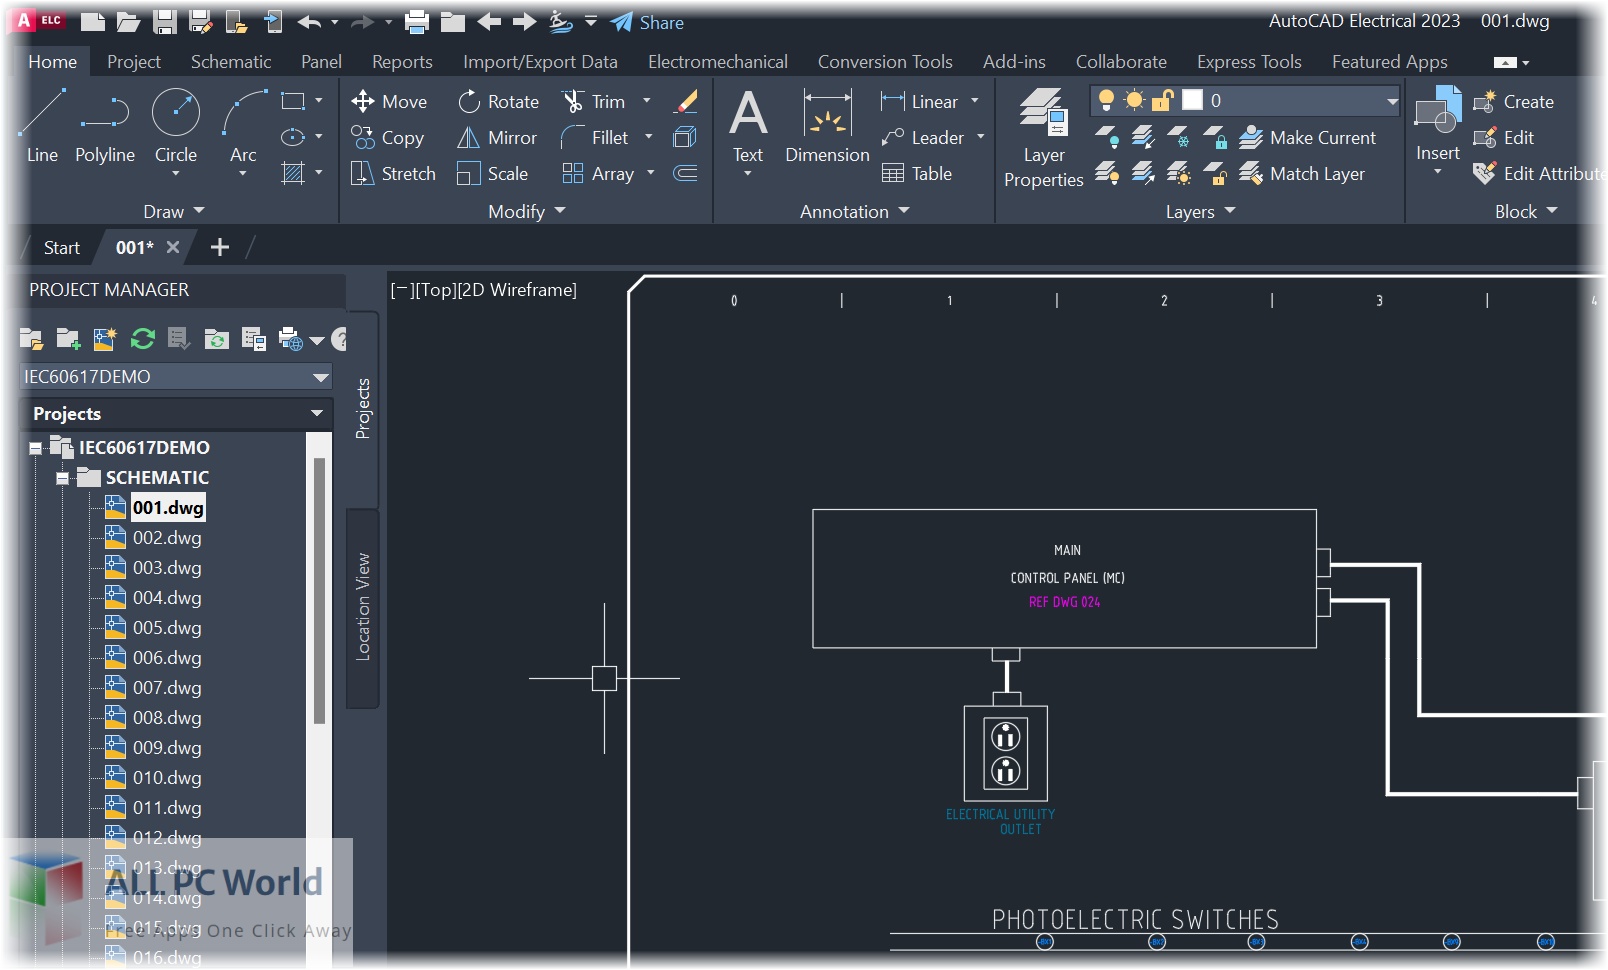 Electrical Addon for Autodesk 2023 Download